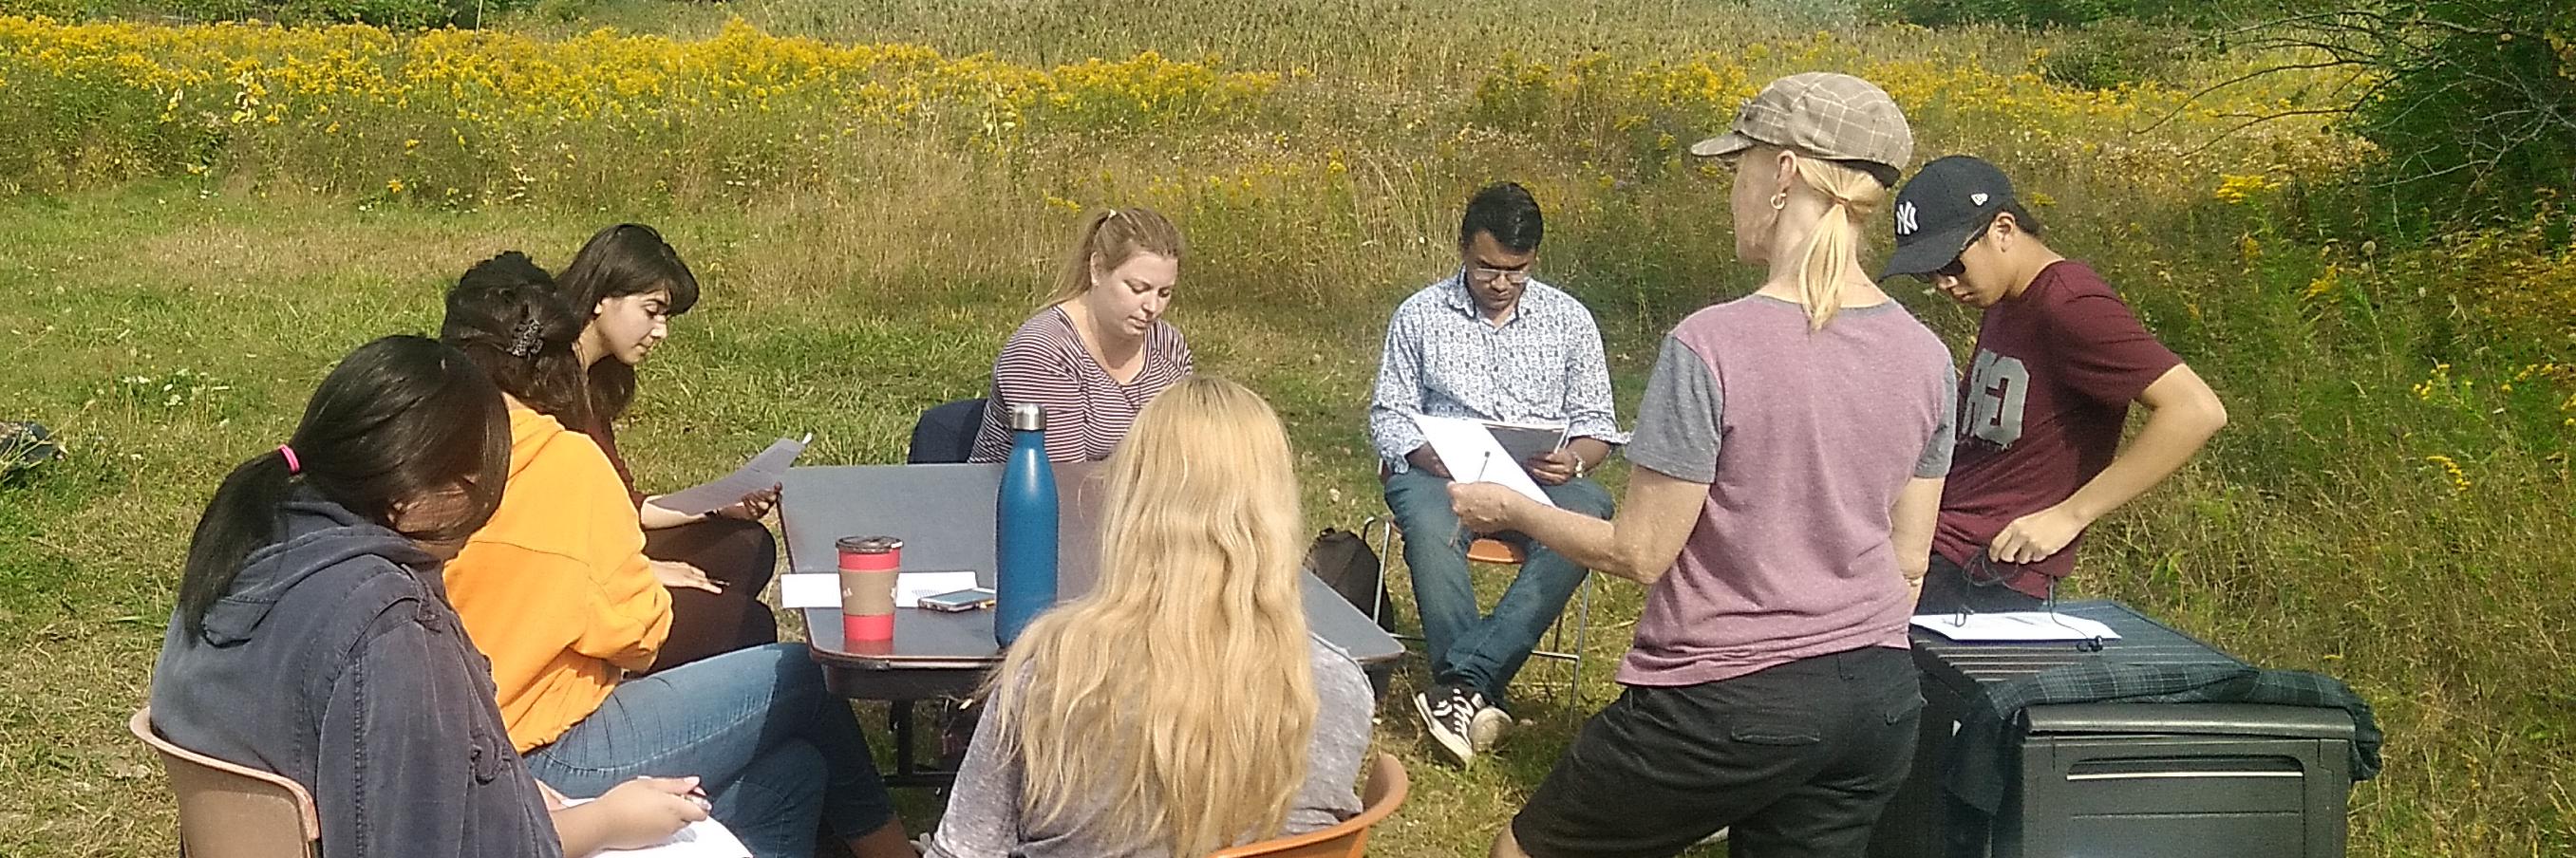 people discussing findings at campus farm 